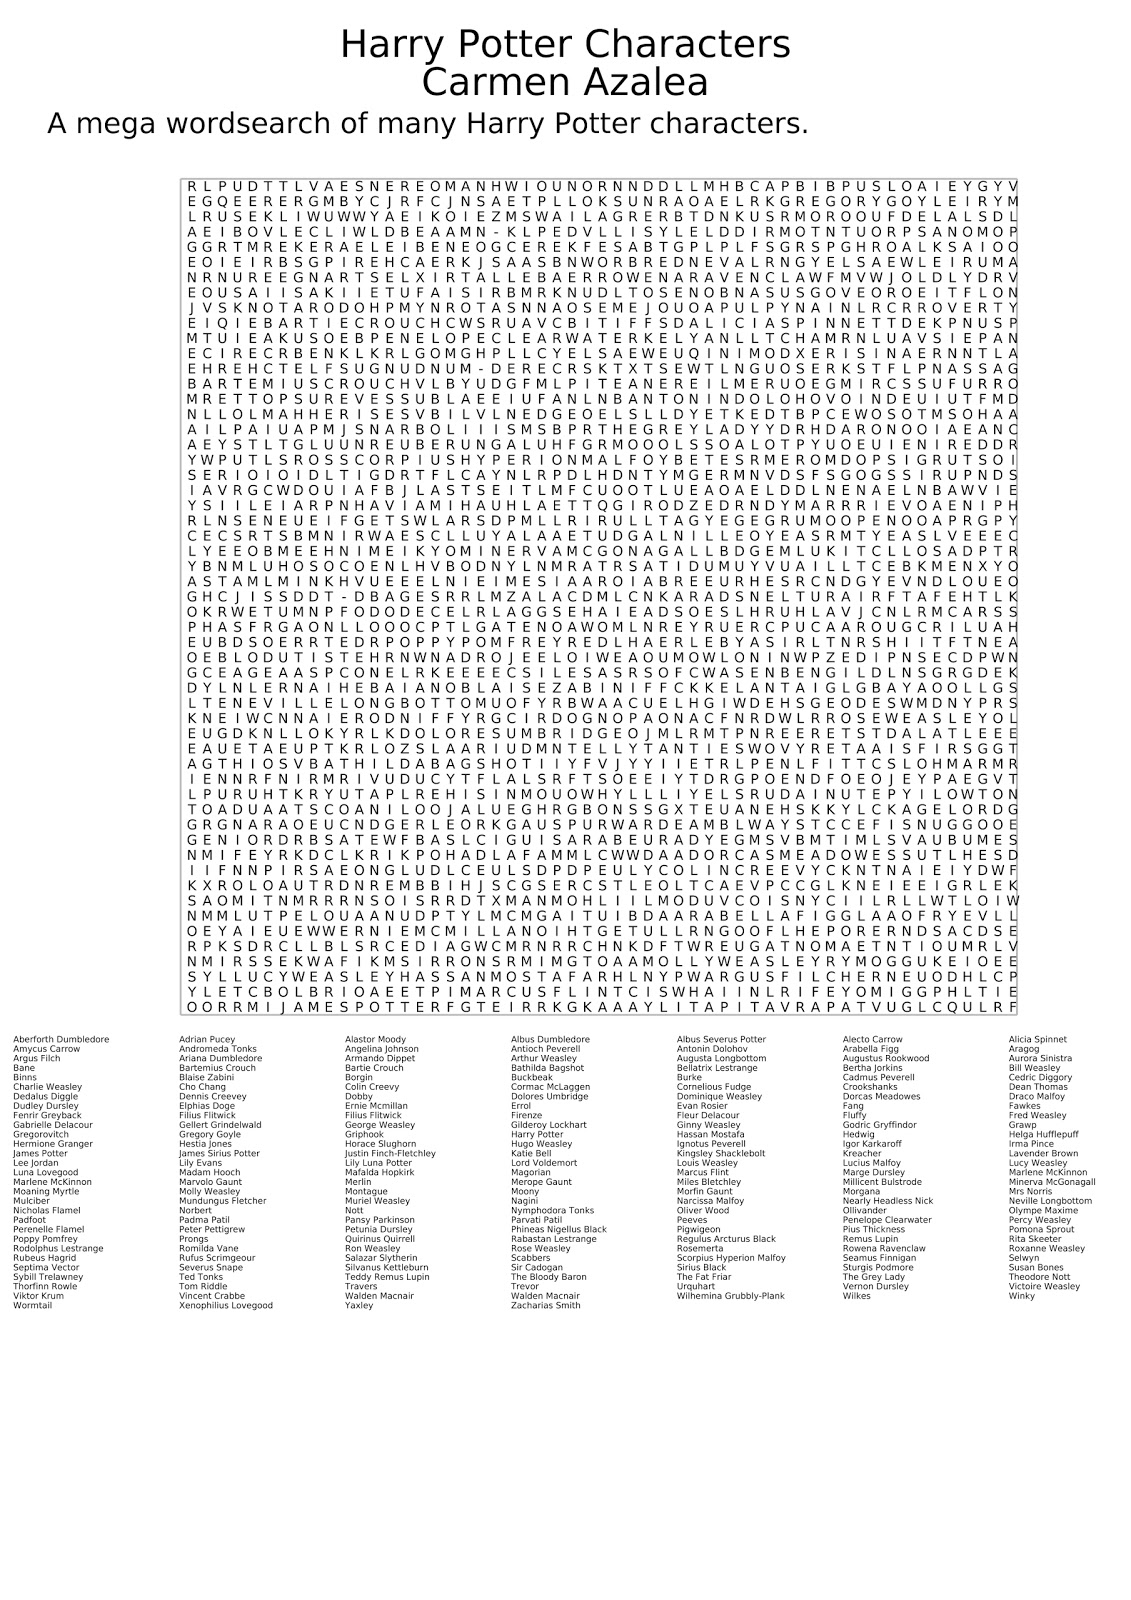 Harry Potter character word search